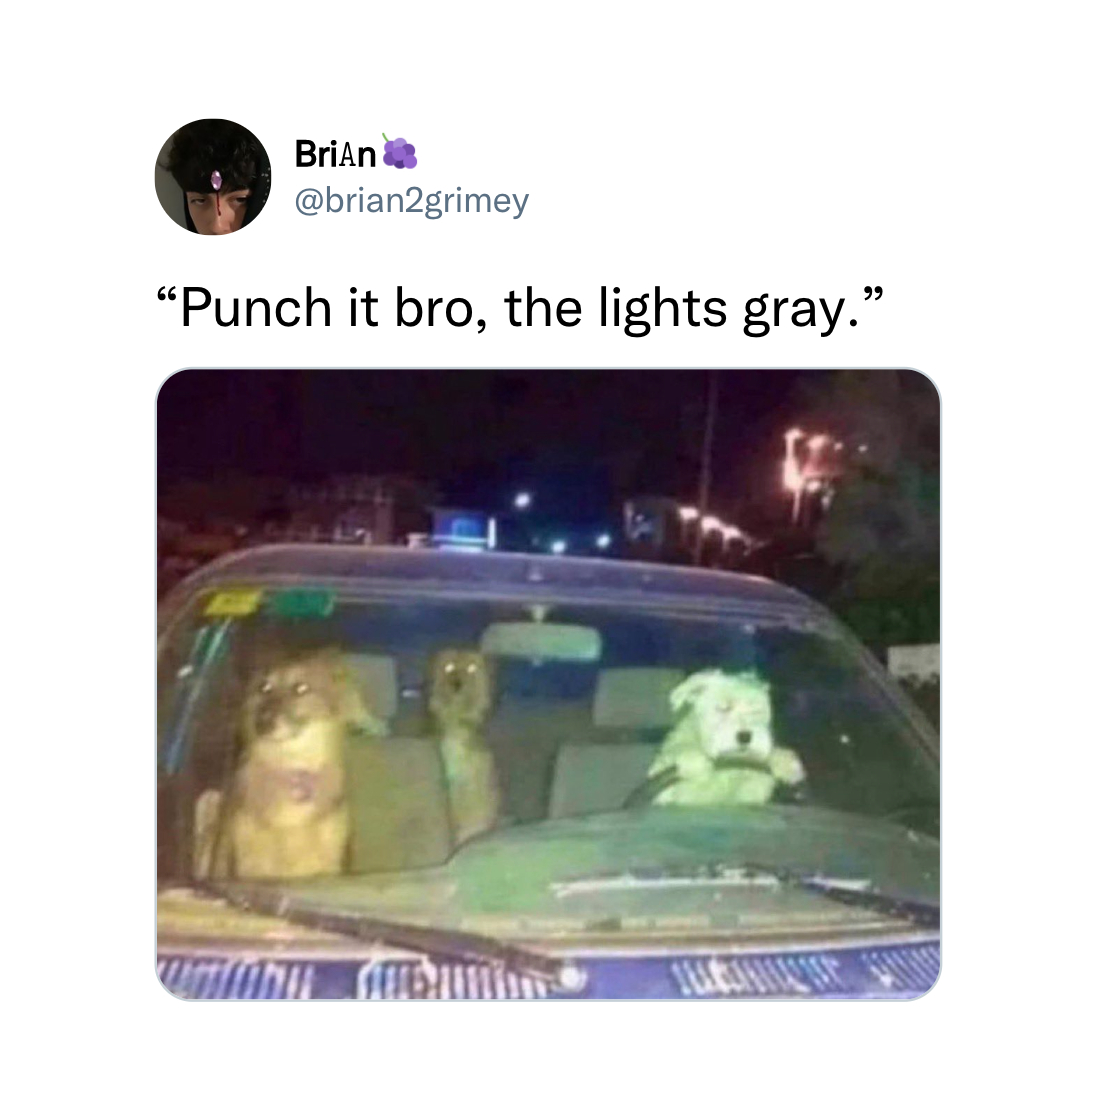 funny memes and tweets - punch it bro the lights gray - Brian "Punch it bro, the lights gray." Um Math